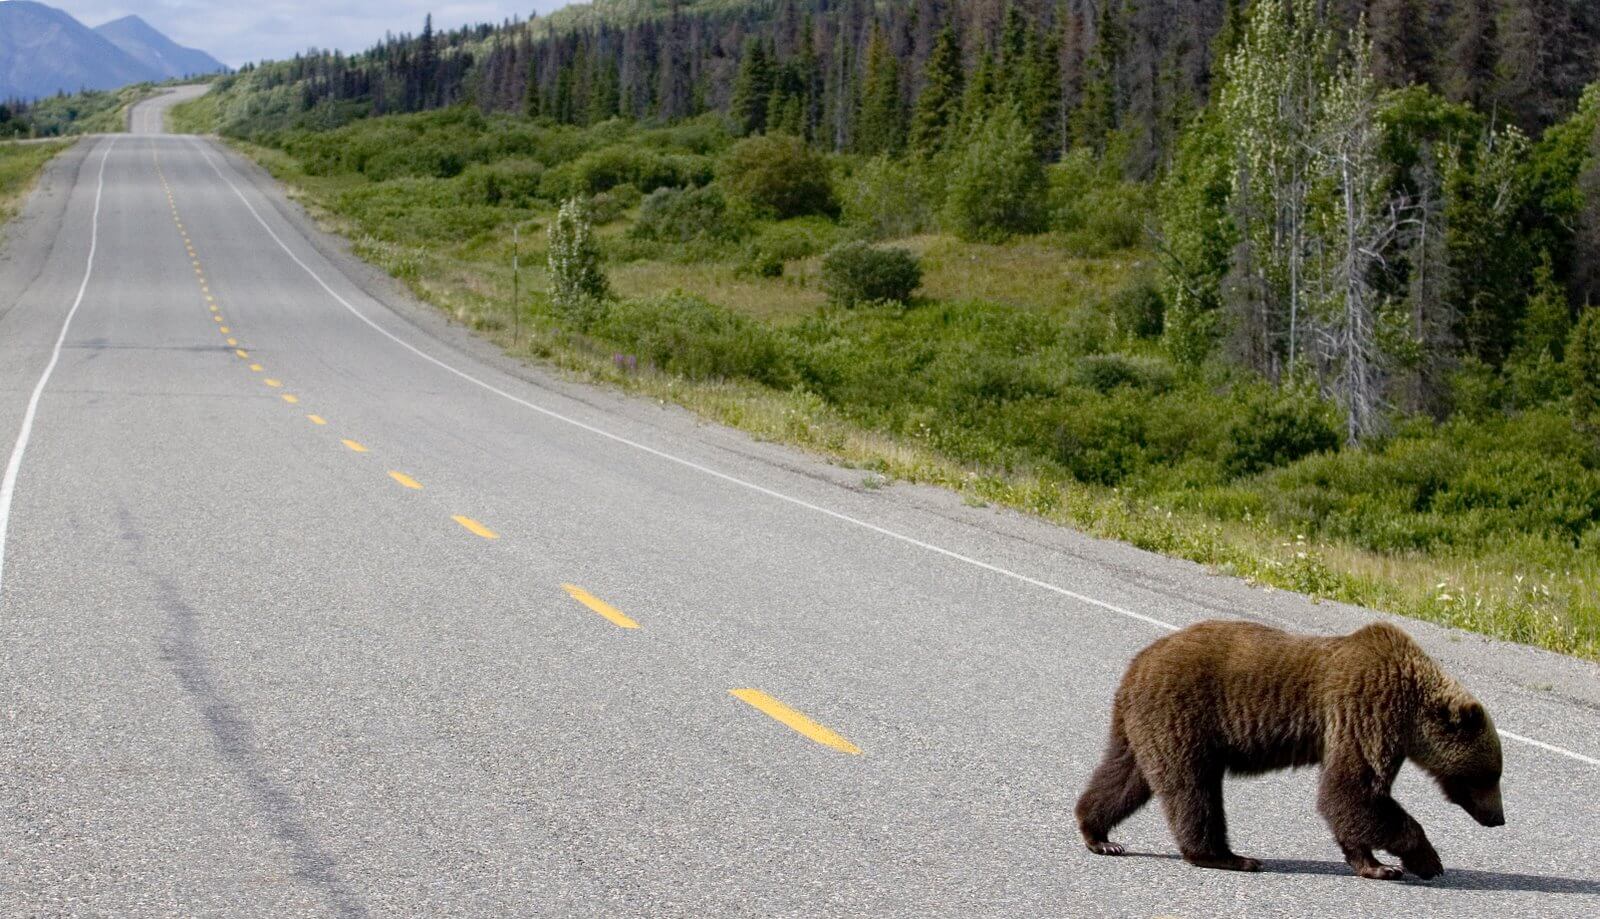 Grizzly Bear on the Road